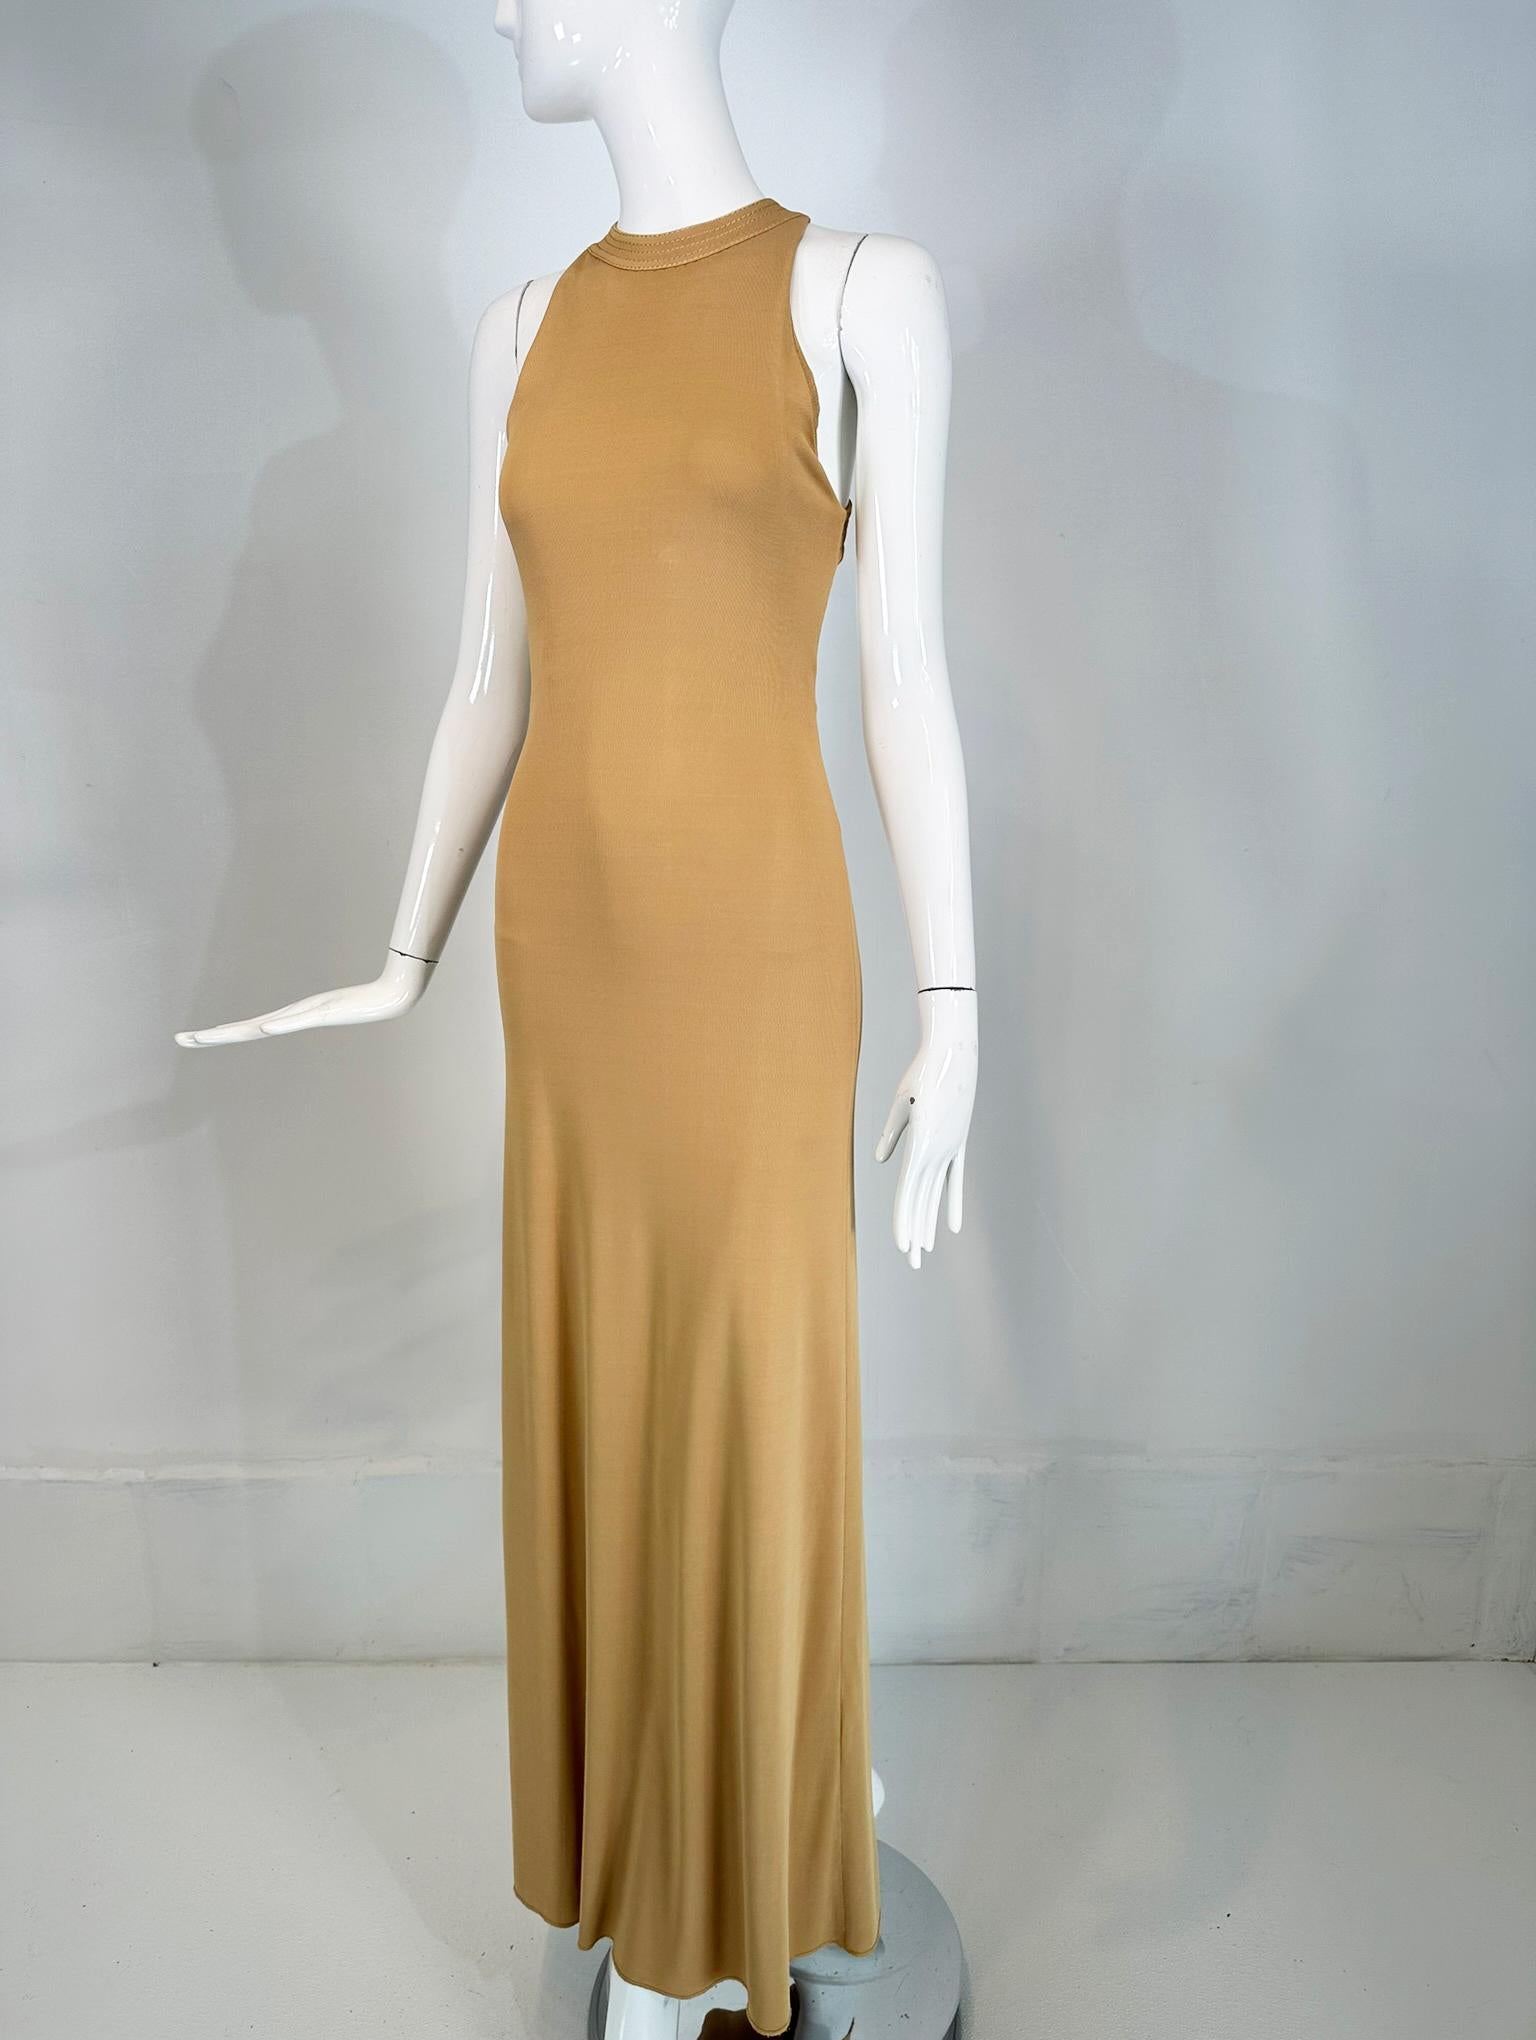 Giorgio Armani Black Jersey Halter Neck Strap Back Evening Dress. From the late 1990s this amazing dress will keep all eyes on you! Graceful & sexy, simple & elegant it doesn't even require jewelry. Fitted dress has a halter neck, it skims the body